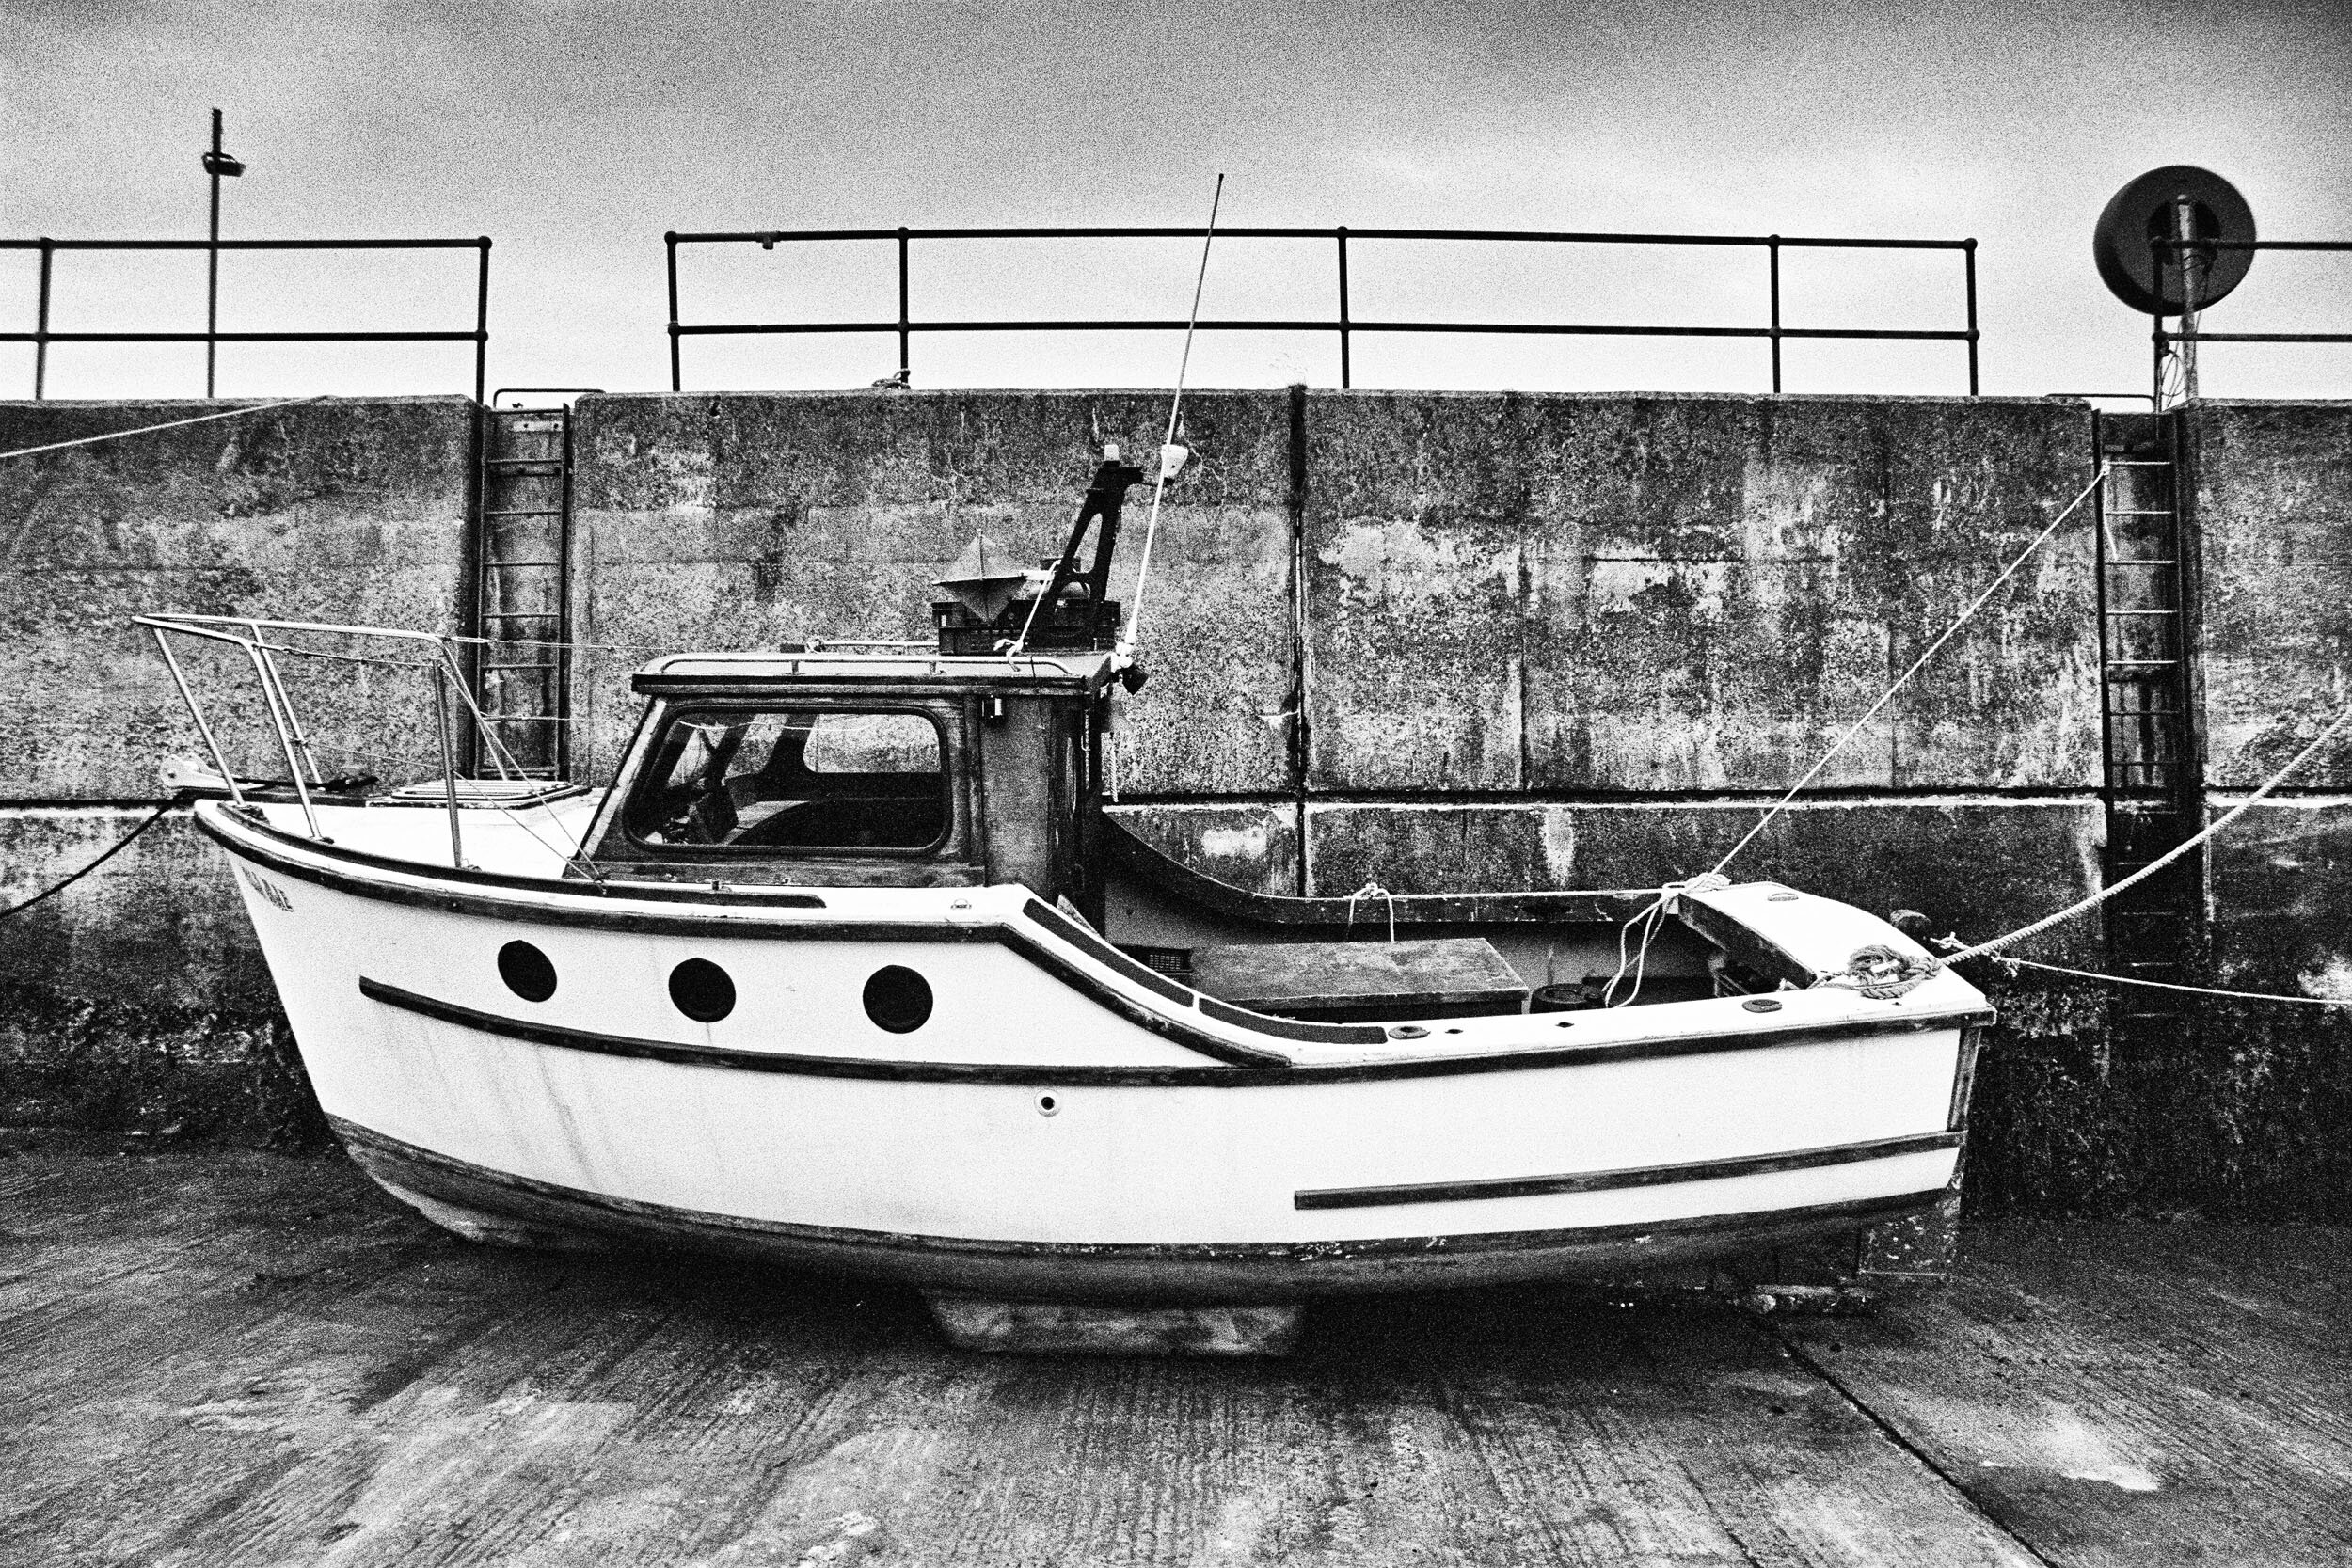  Boat on the Dry, Berneray Harbour, Isle of Berneray, 2019 